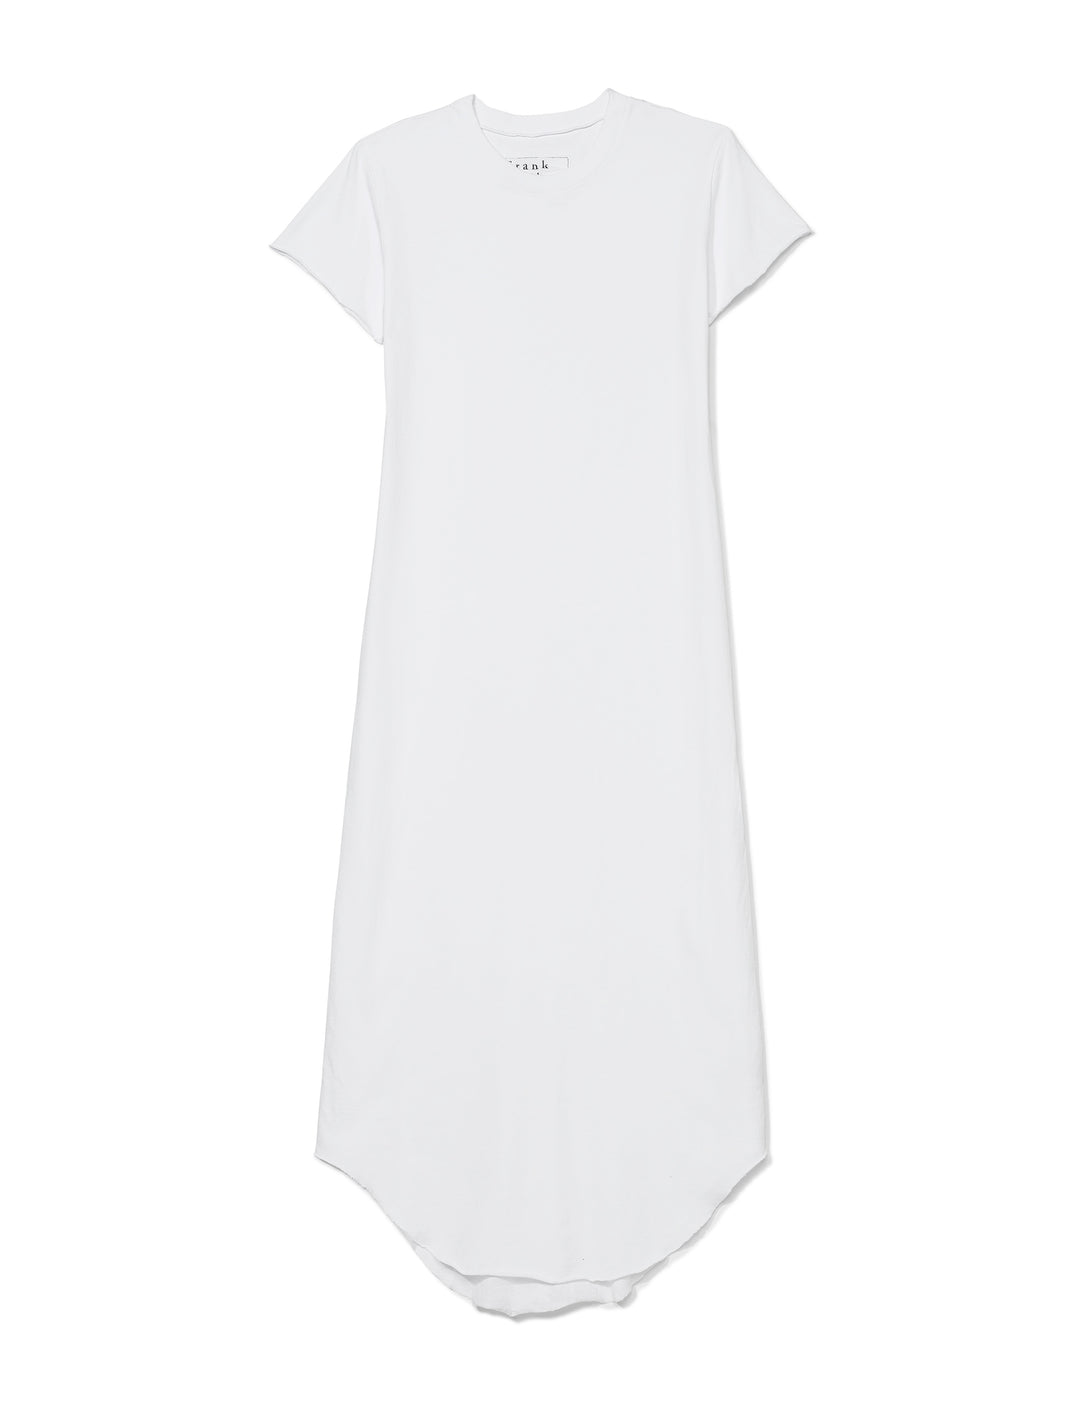 Frank & Eileen - Perfect Tee Dress in White